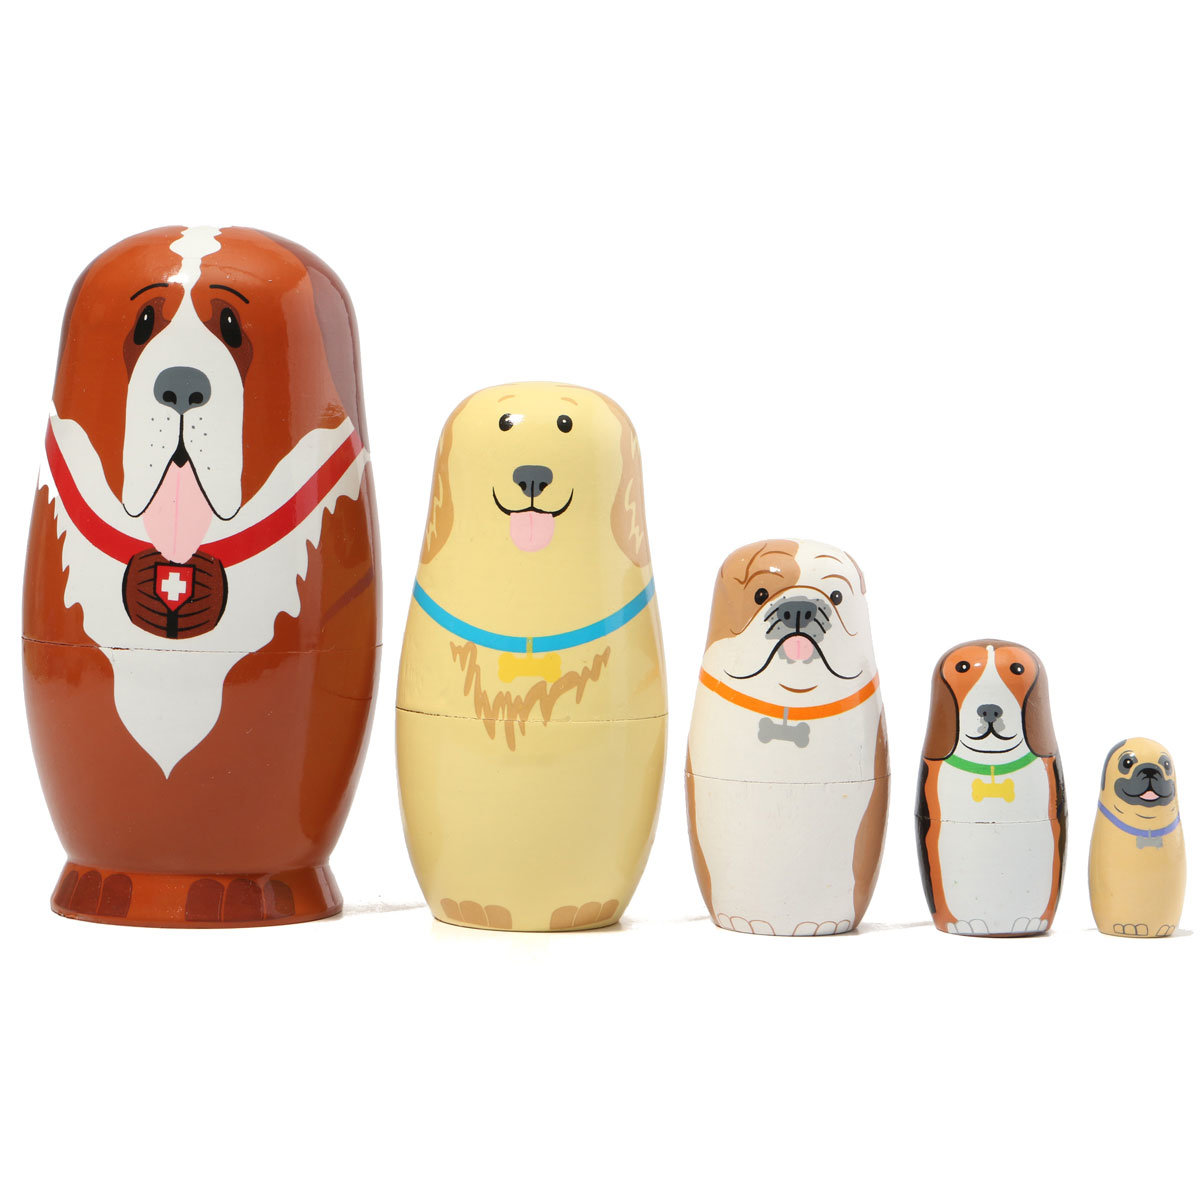 

5 Pcs Russian Wooden Nesting Dolls Dogs Matryoshka Hand Painted Gift Tricky Toys Creative Gift